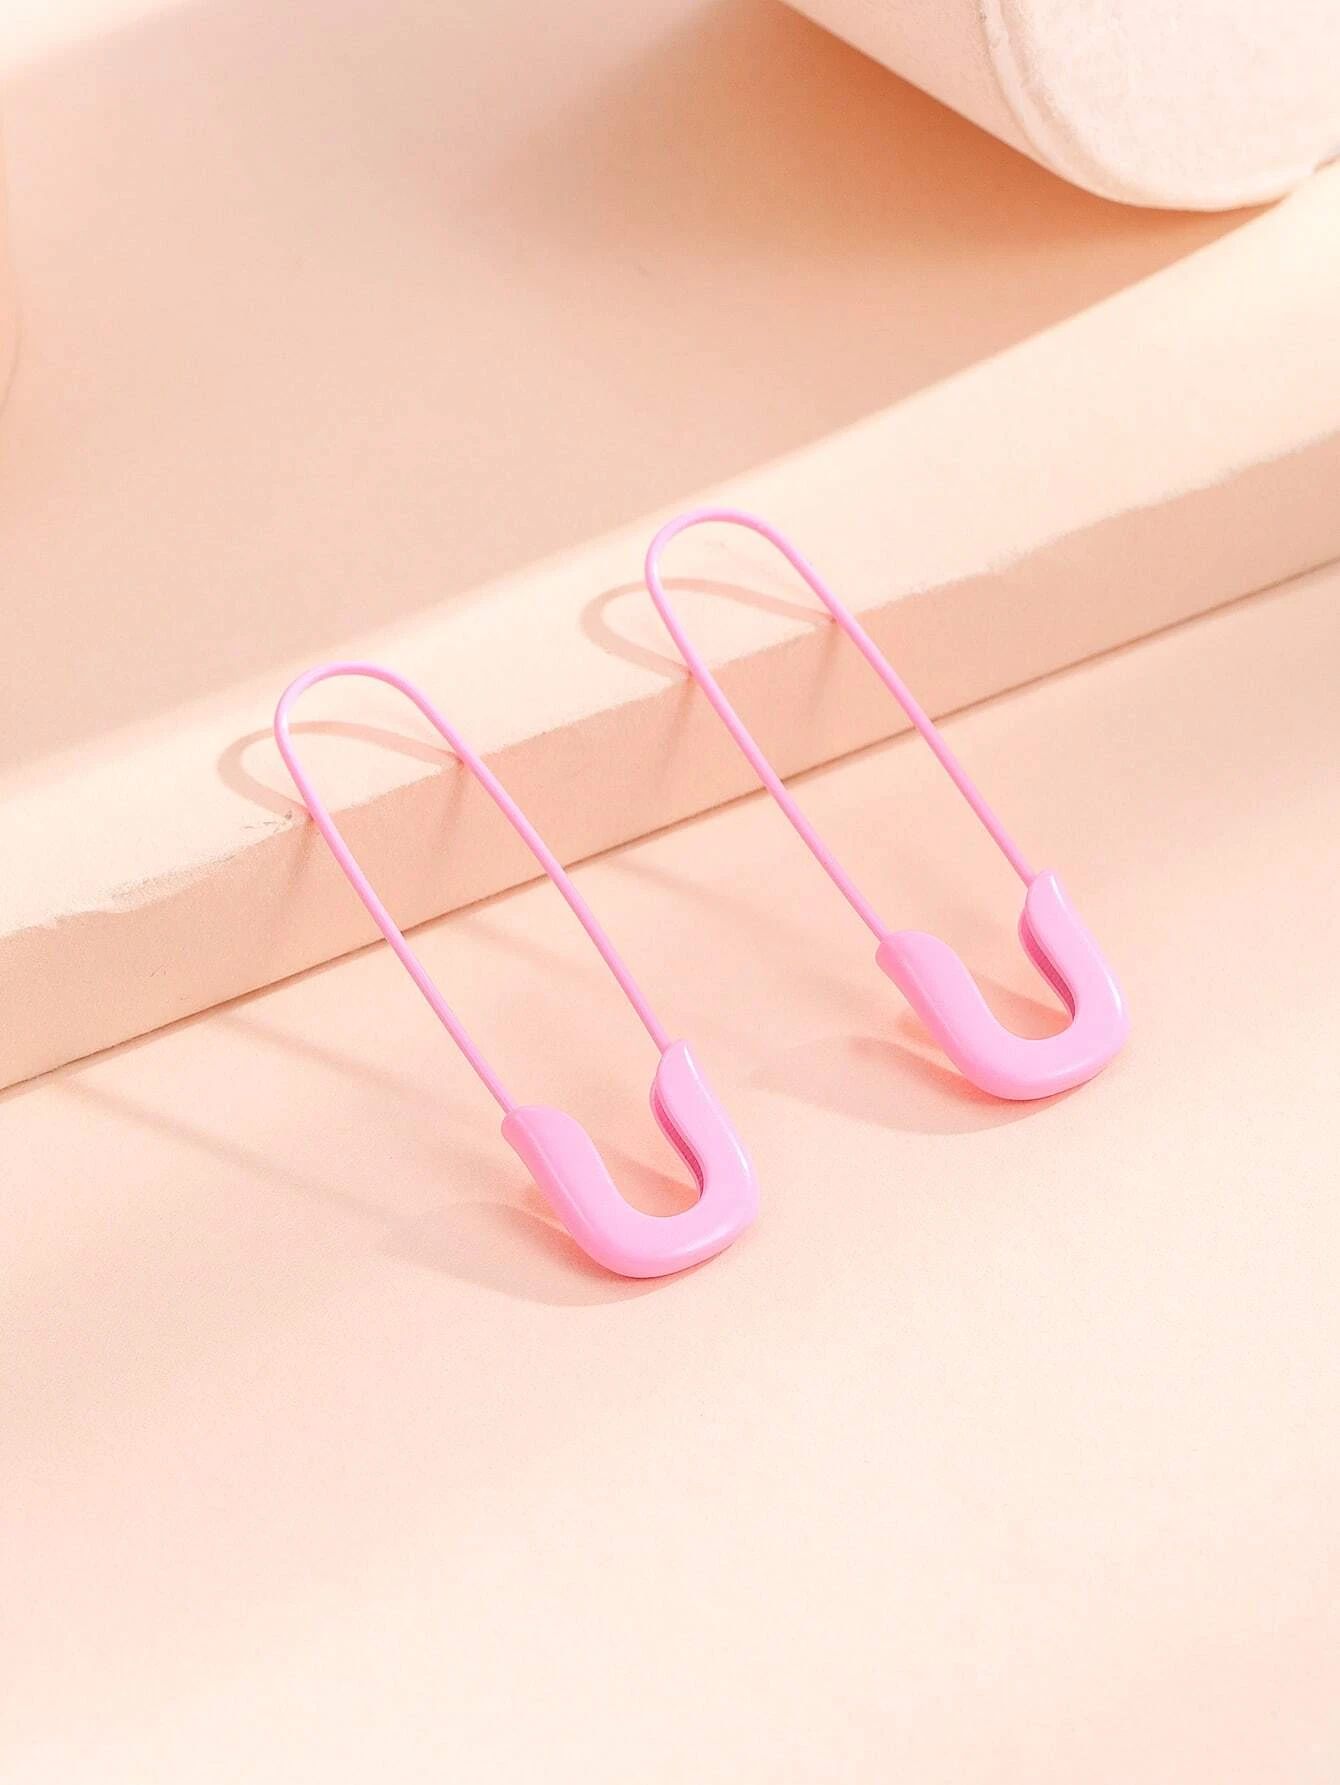 Safety Pin Design Earrings | SHEIN